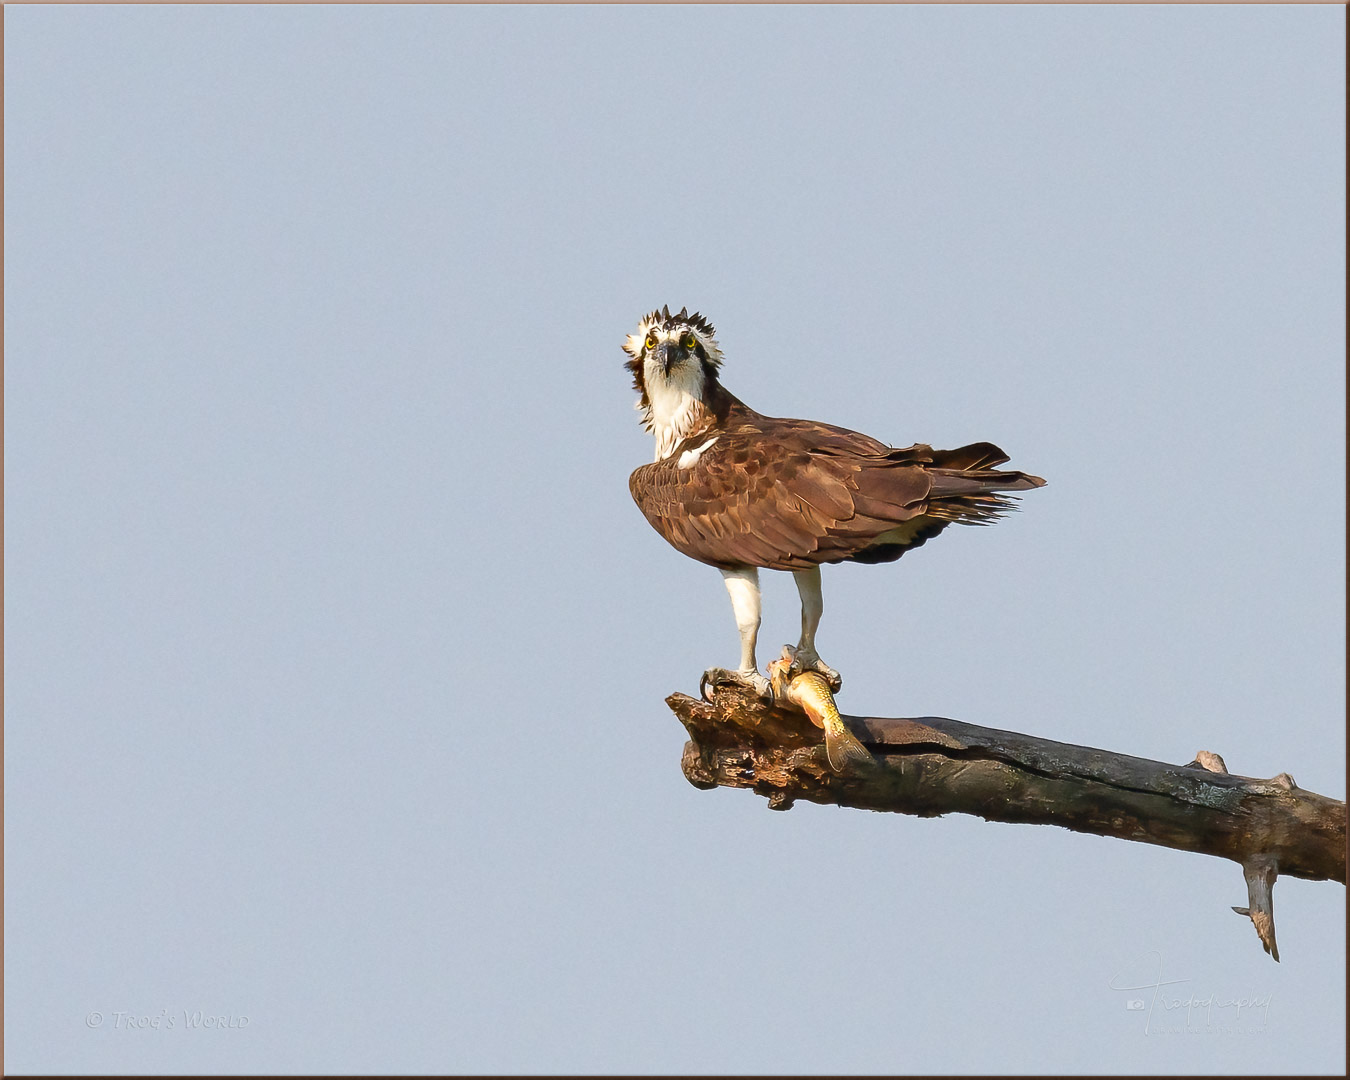 Osprey on a perch with a fish